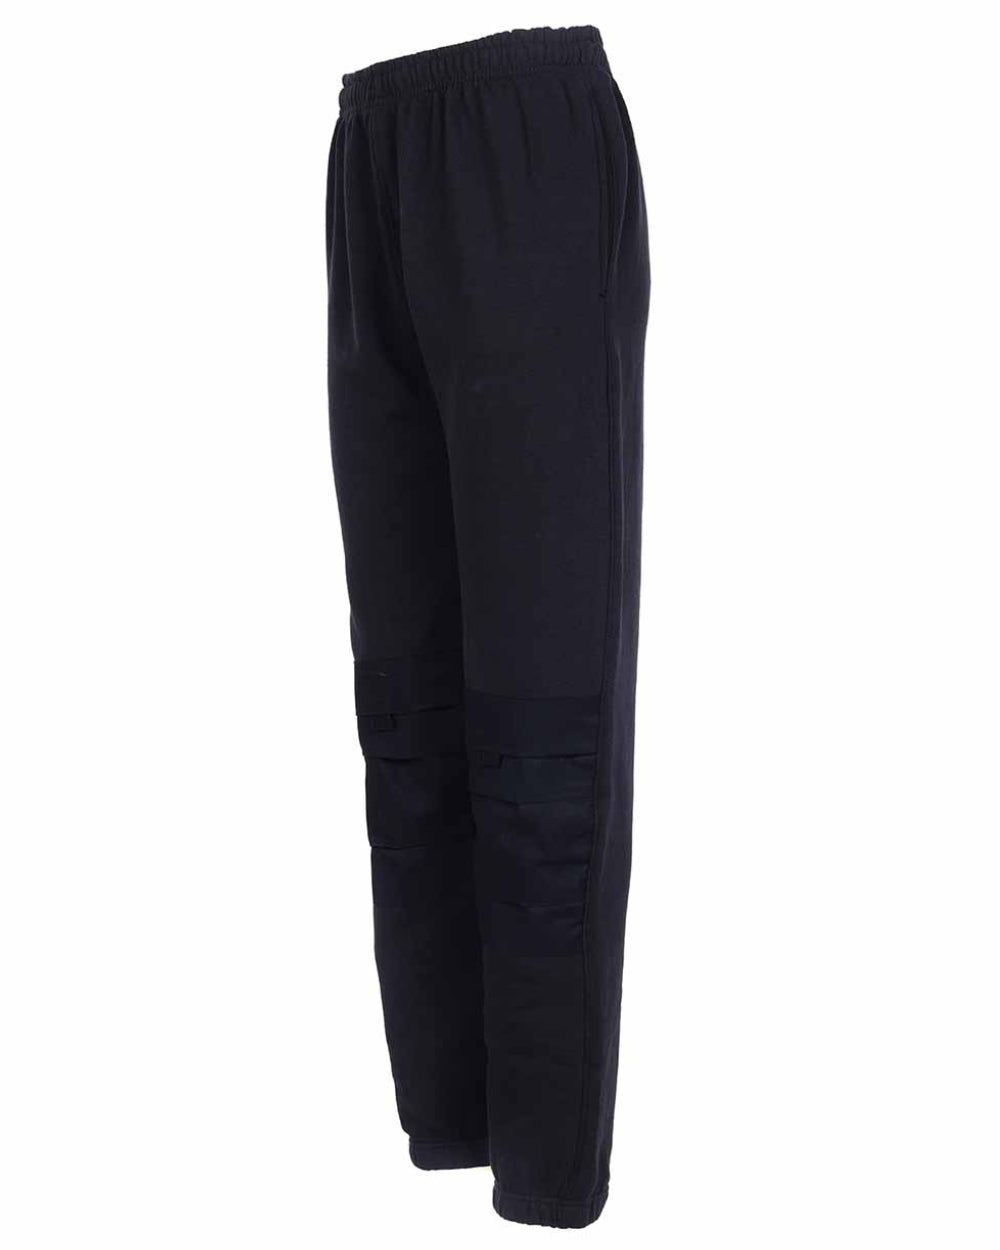 Navy Blue Coloured TuffStuff Comfort Work Trouser On A White Background 